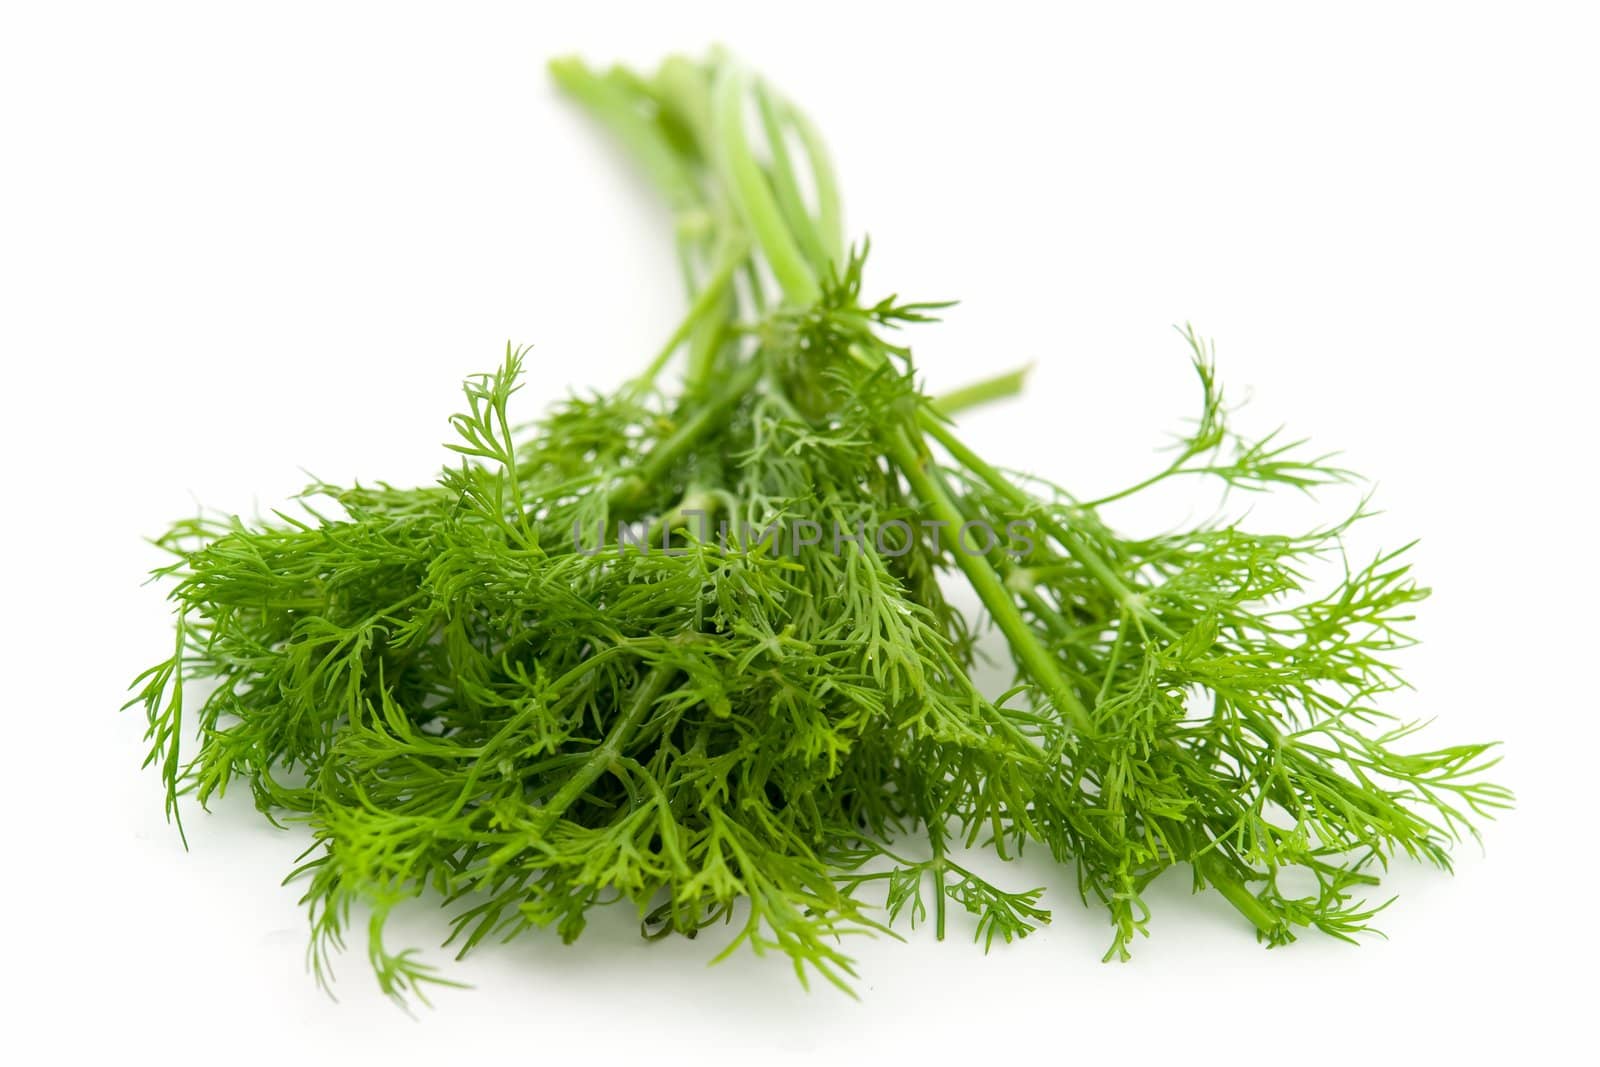 juicy green dill on a white background